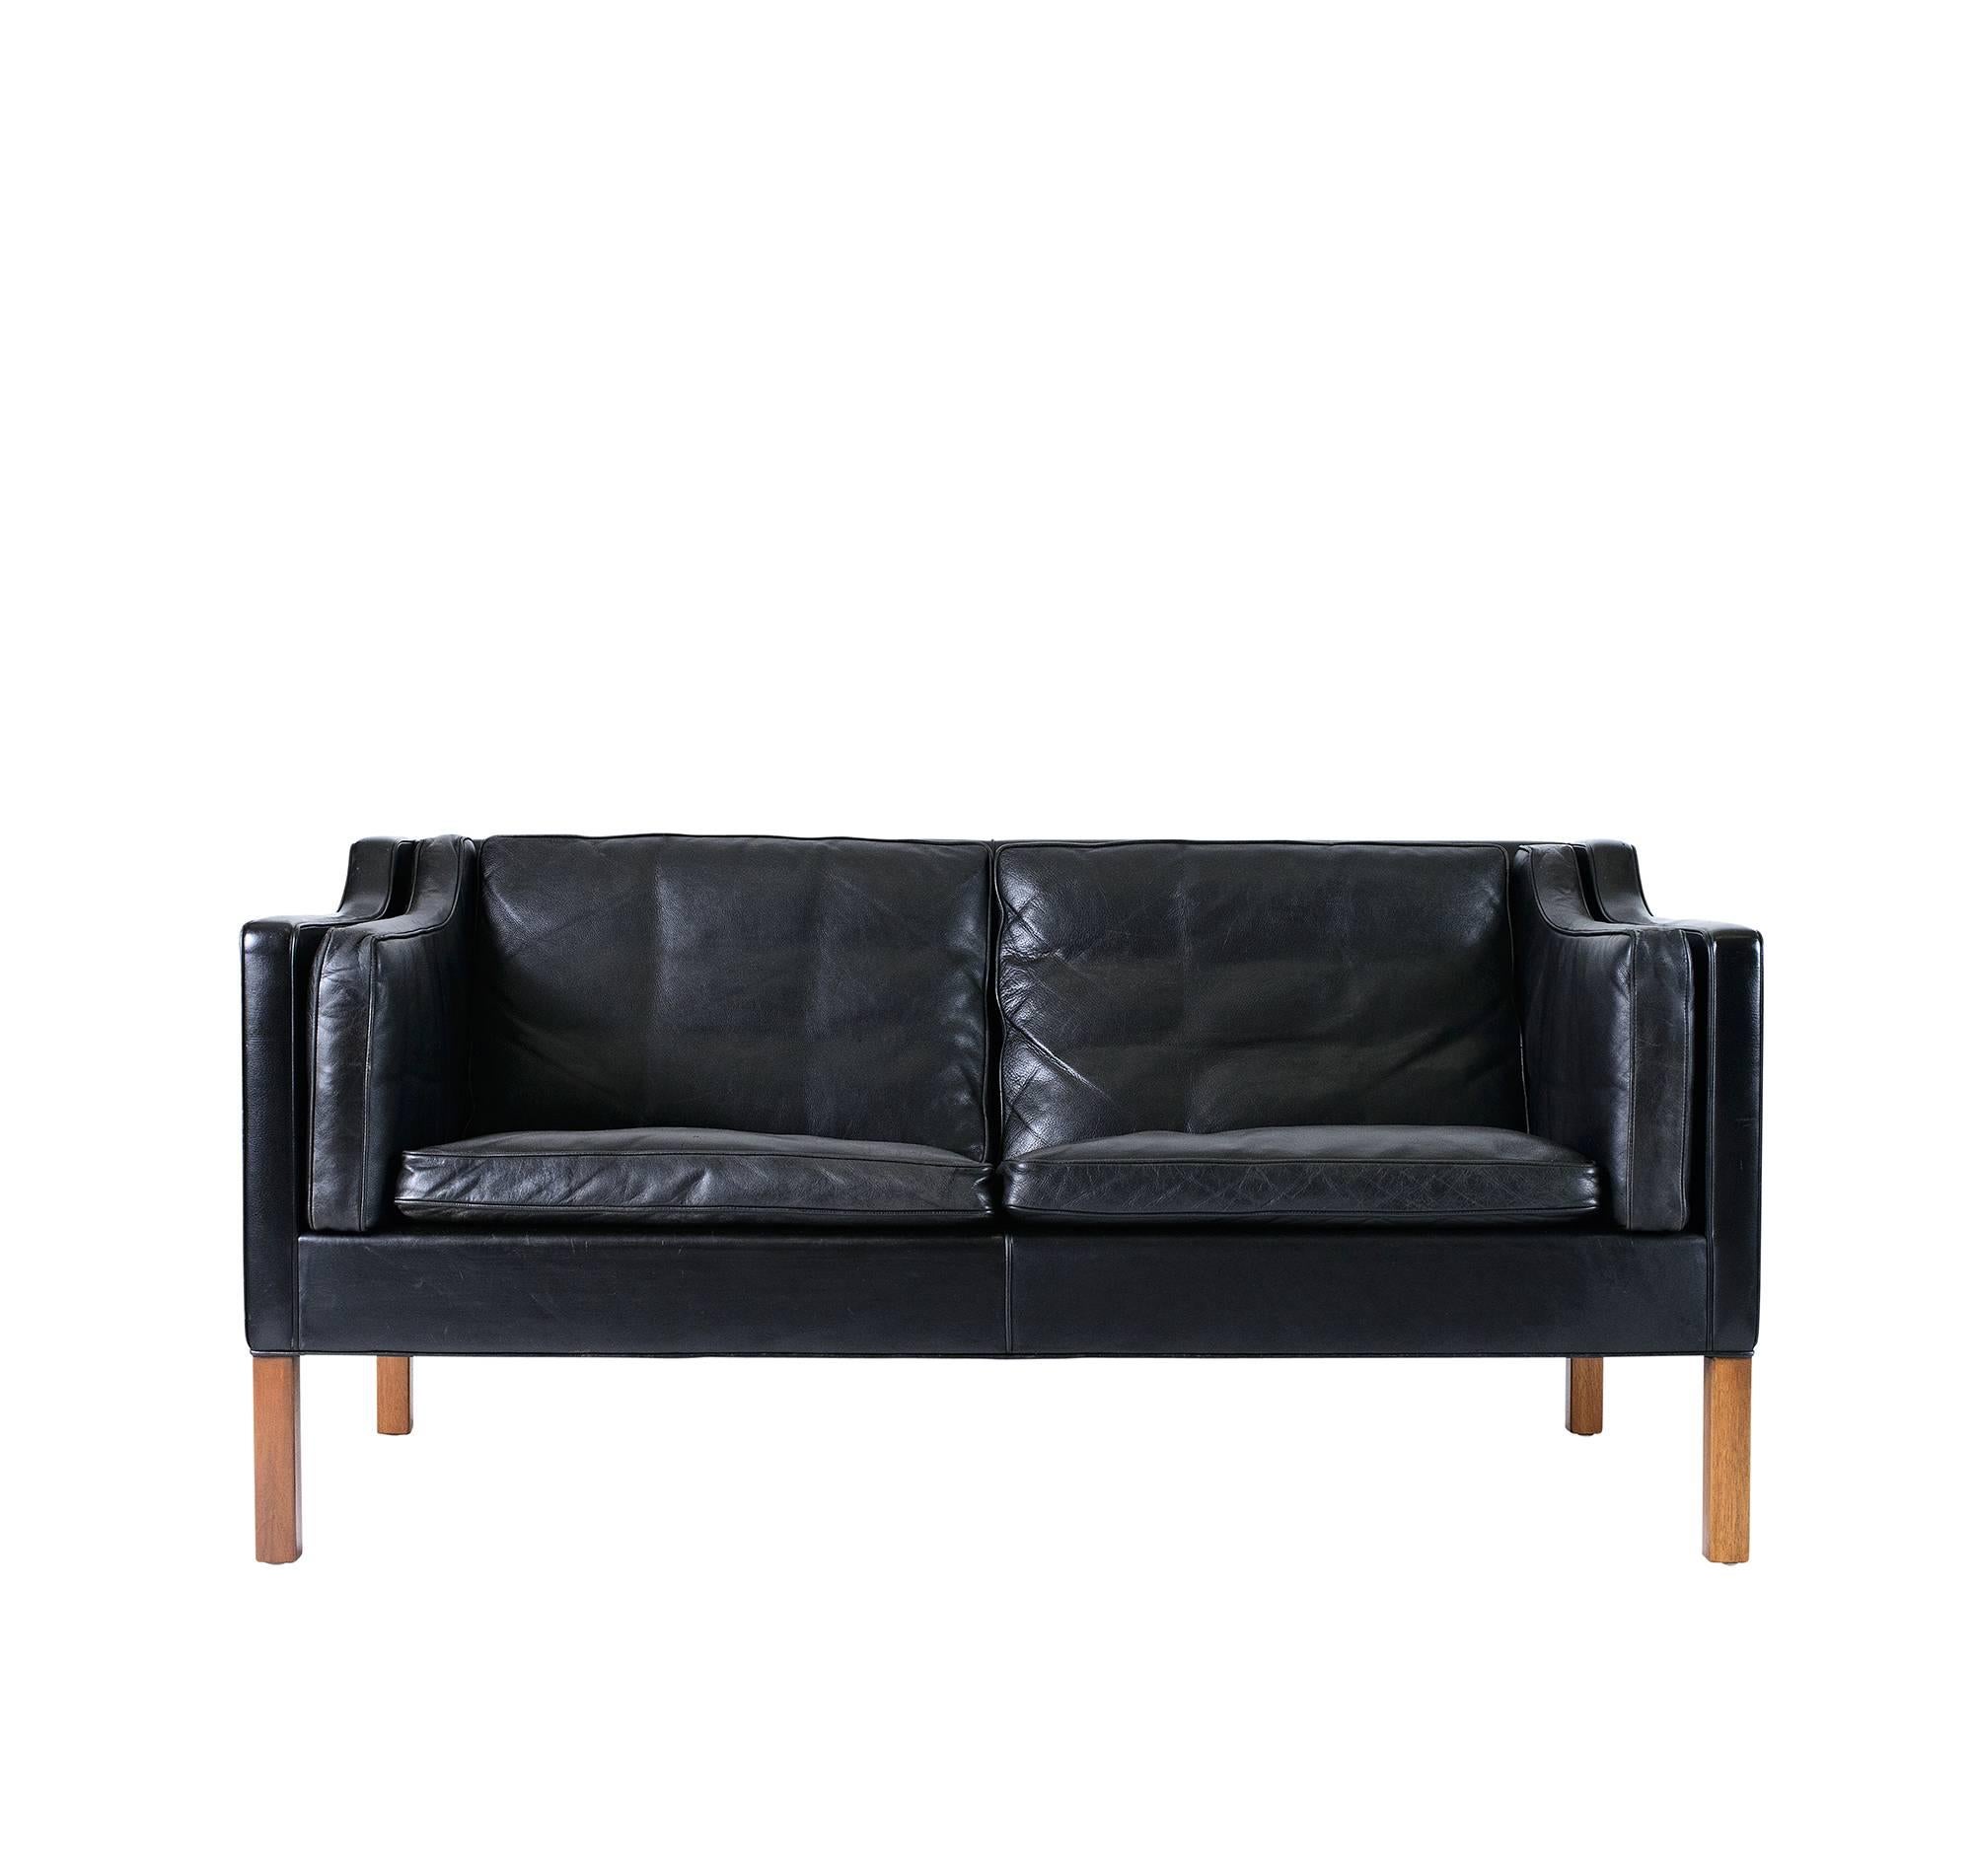 Børge Mogensen, model #2212 two-seat sofa designed in 1962 and produced by Fredericia.